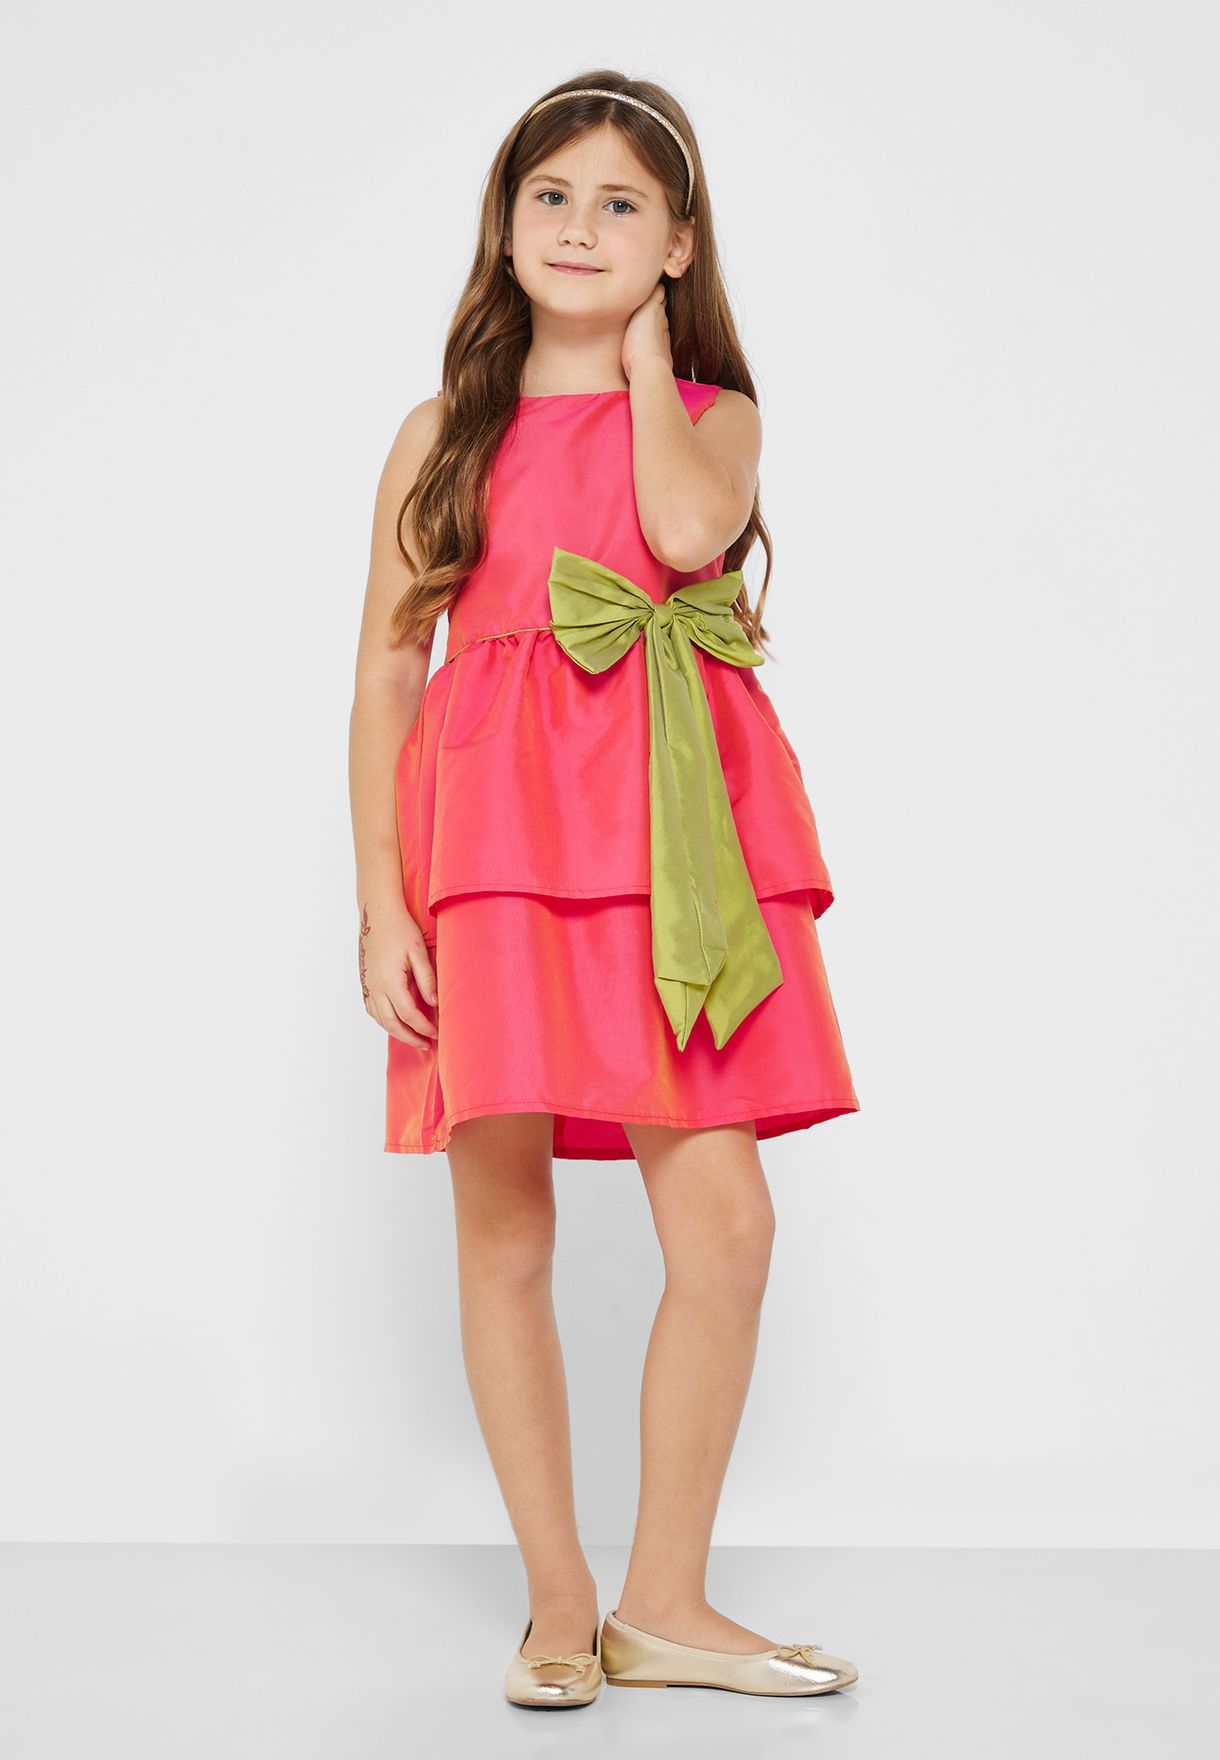 Partwear Dress With Bow Detailing On Waist